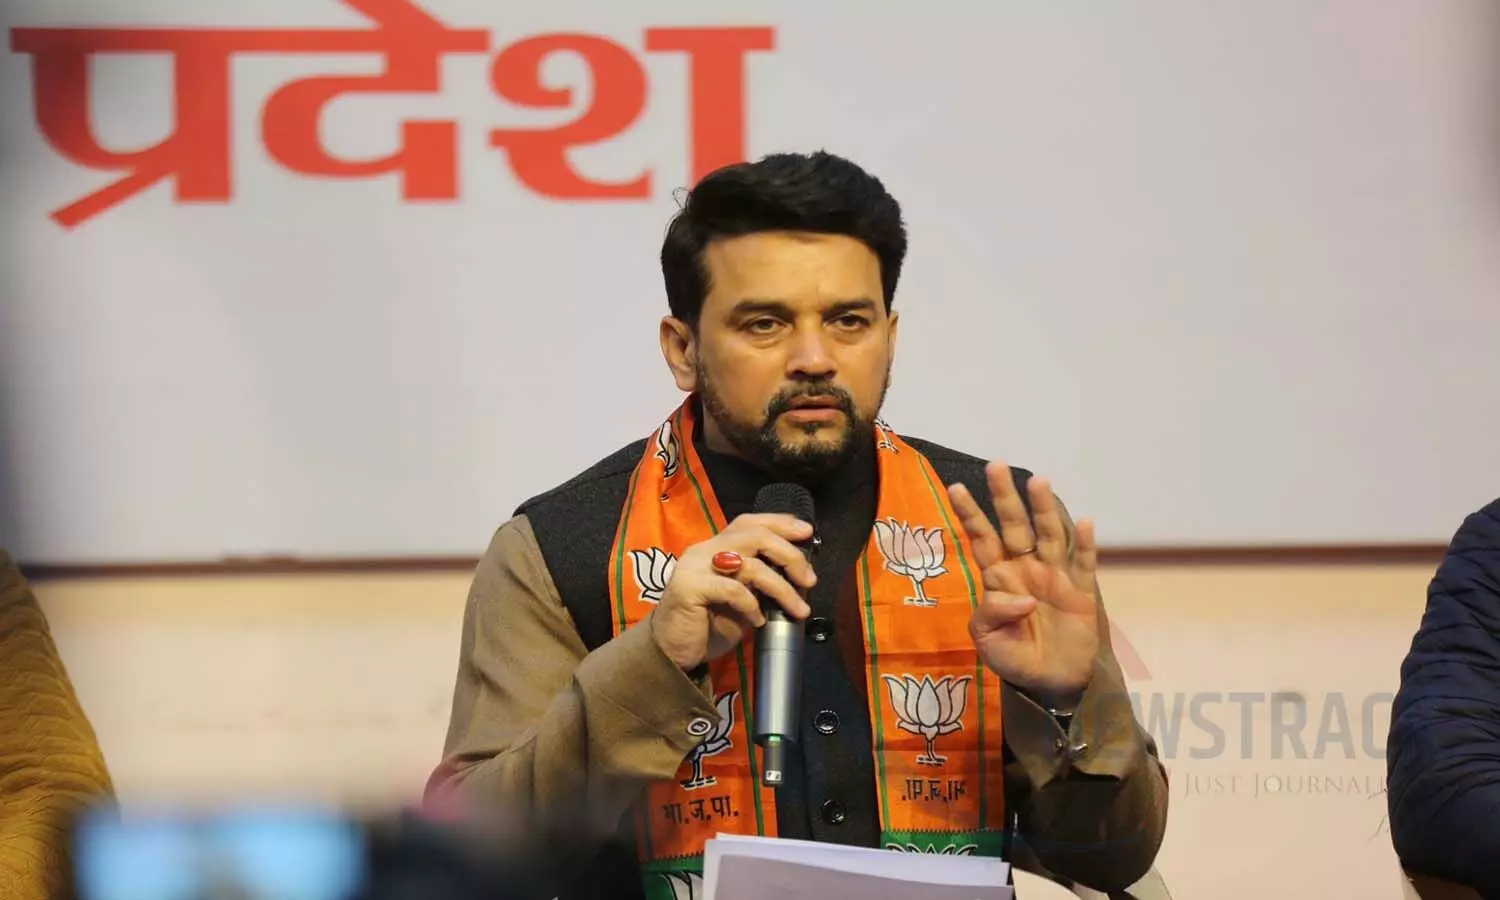 UP Election 2022: Union Minister Anurag Thakurs press conference in BJPs office, said- Opposition is afraid of defeat